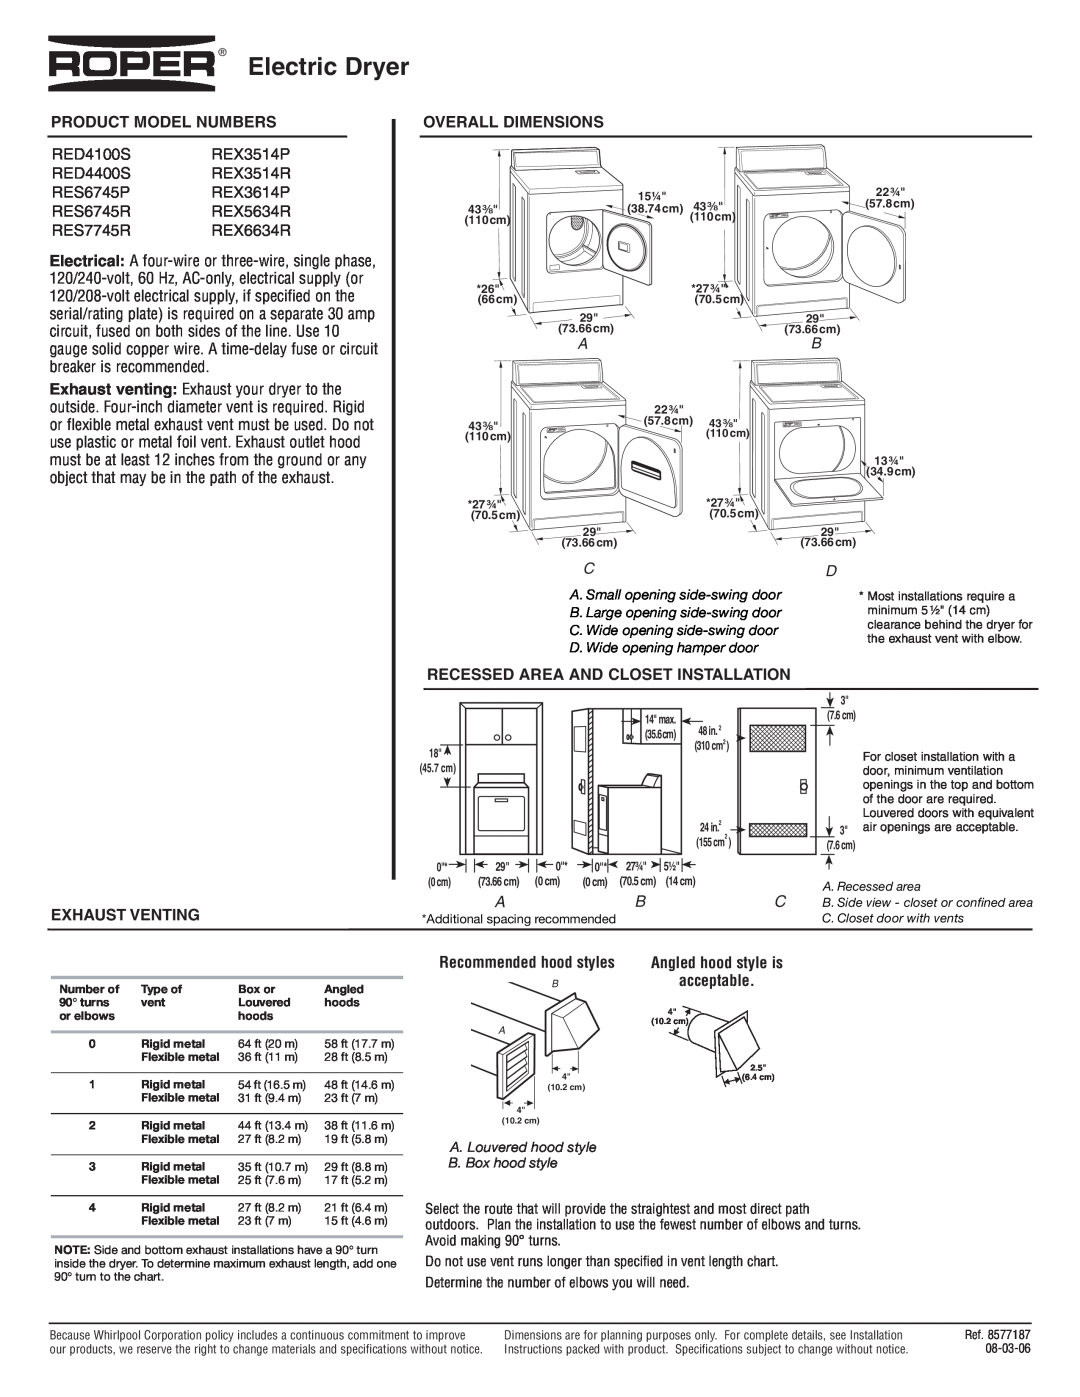 Roper REX5634R dimensions Electric Dryer, Product Model Numbers, RES7745RREX6634R, Overall Dimensions, Exhaust Venting 